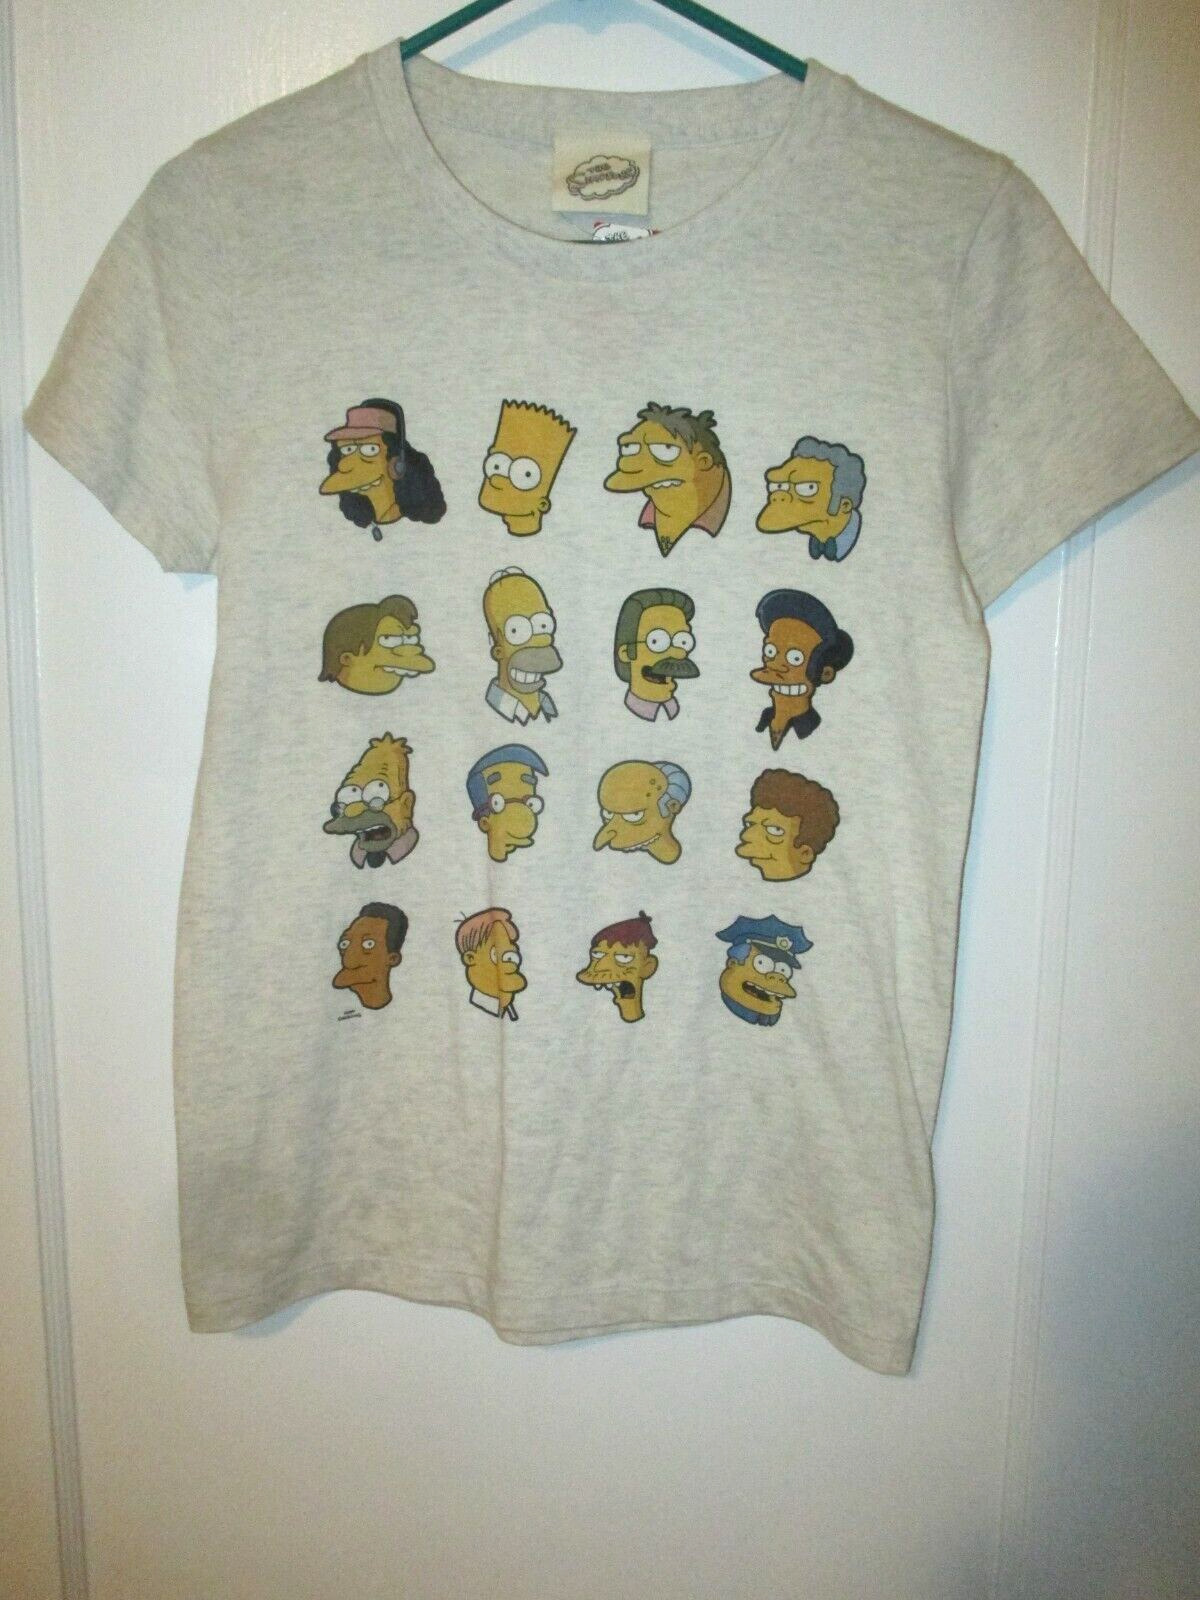 2014 SMALL PLANET CO. THE SIMPSONS 16 CHARACTER T SHIRT BART+HOMER+MOE NWT RARE